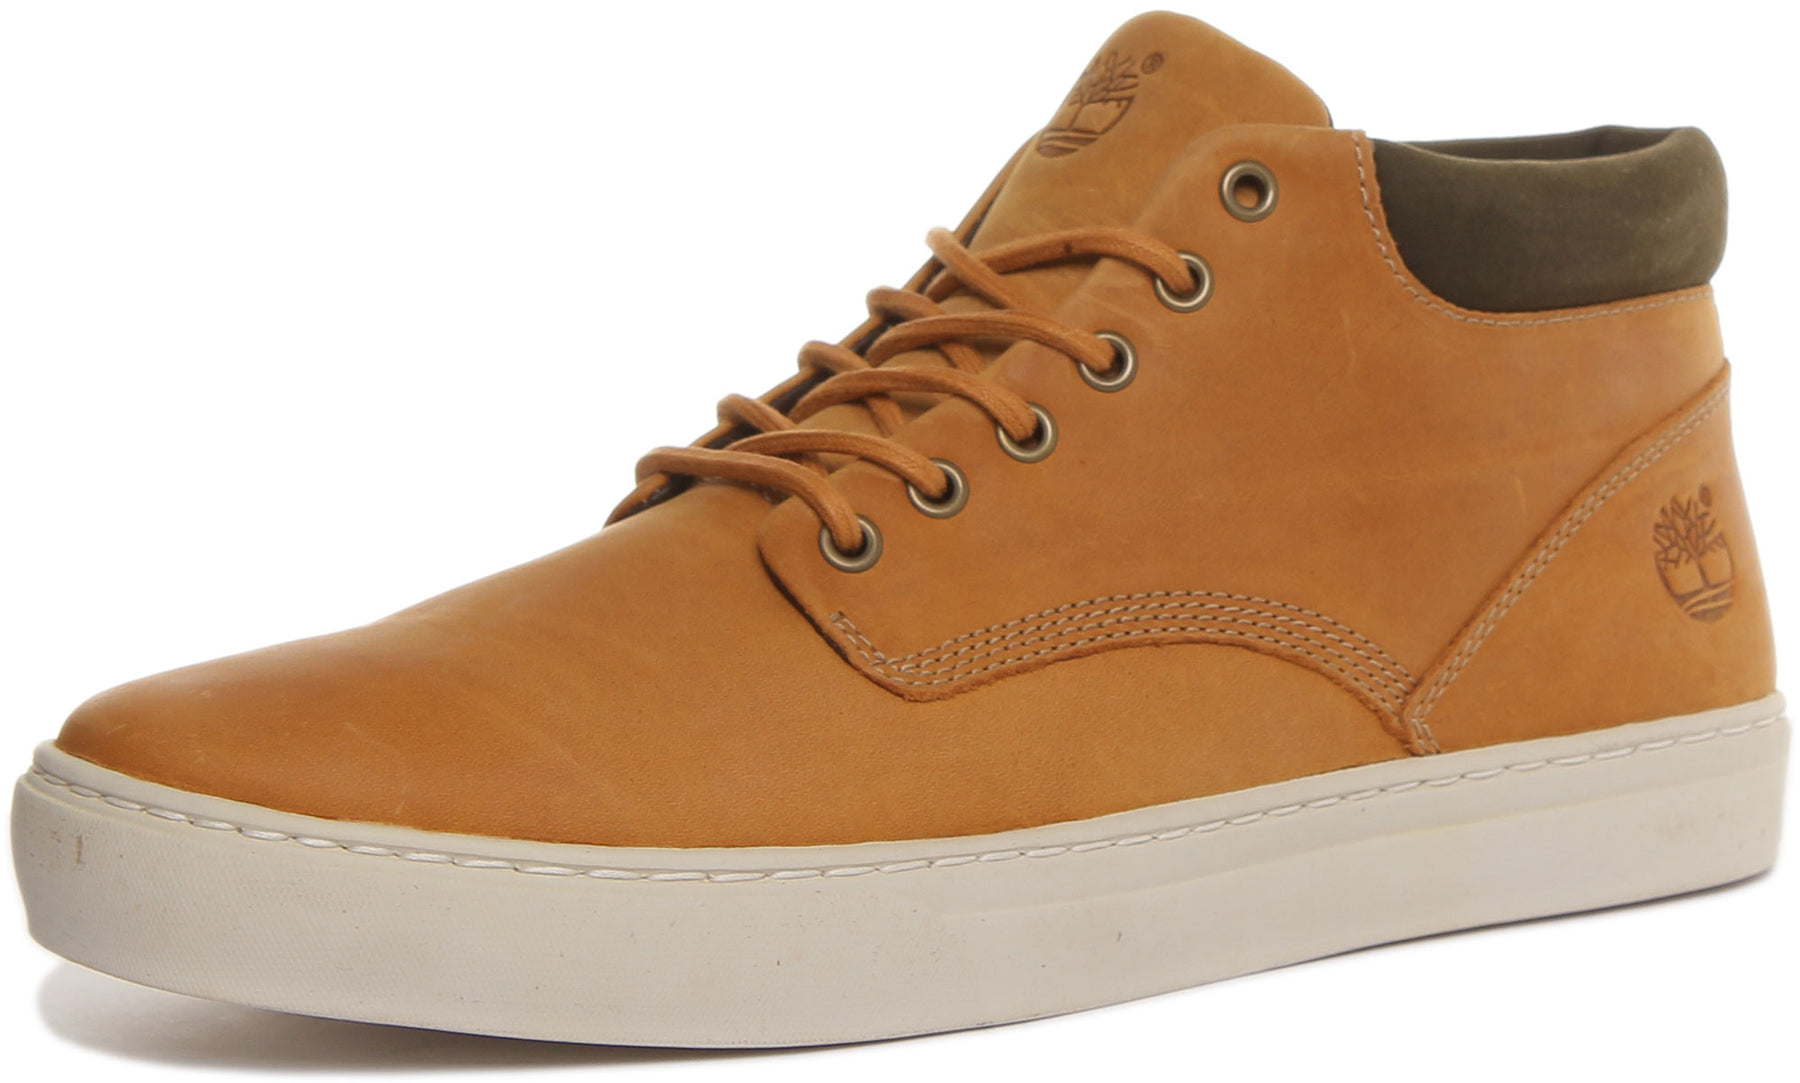 Timberland A1Ju1 Wheat For Men | Mens Cupsole Lace up Ankle Boot ...